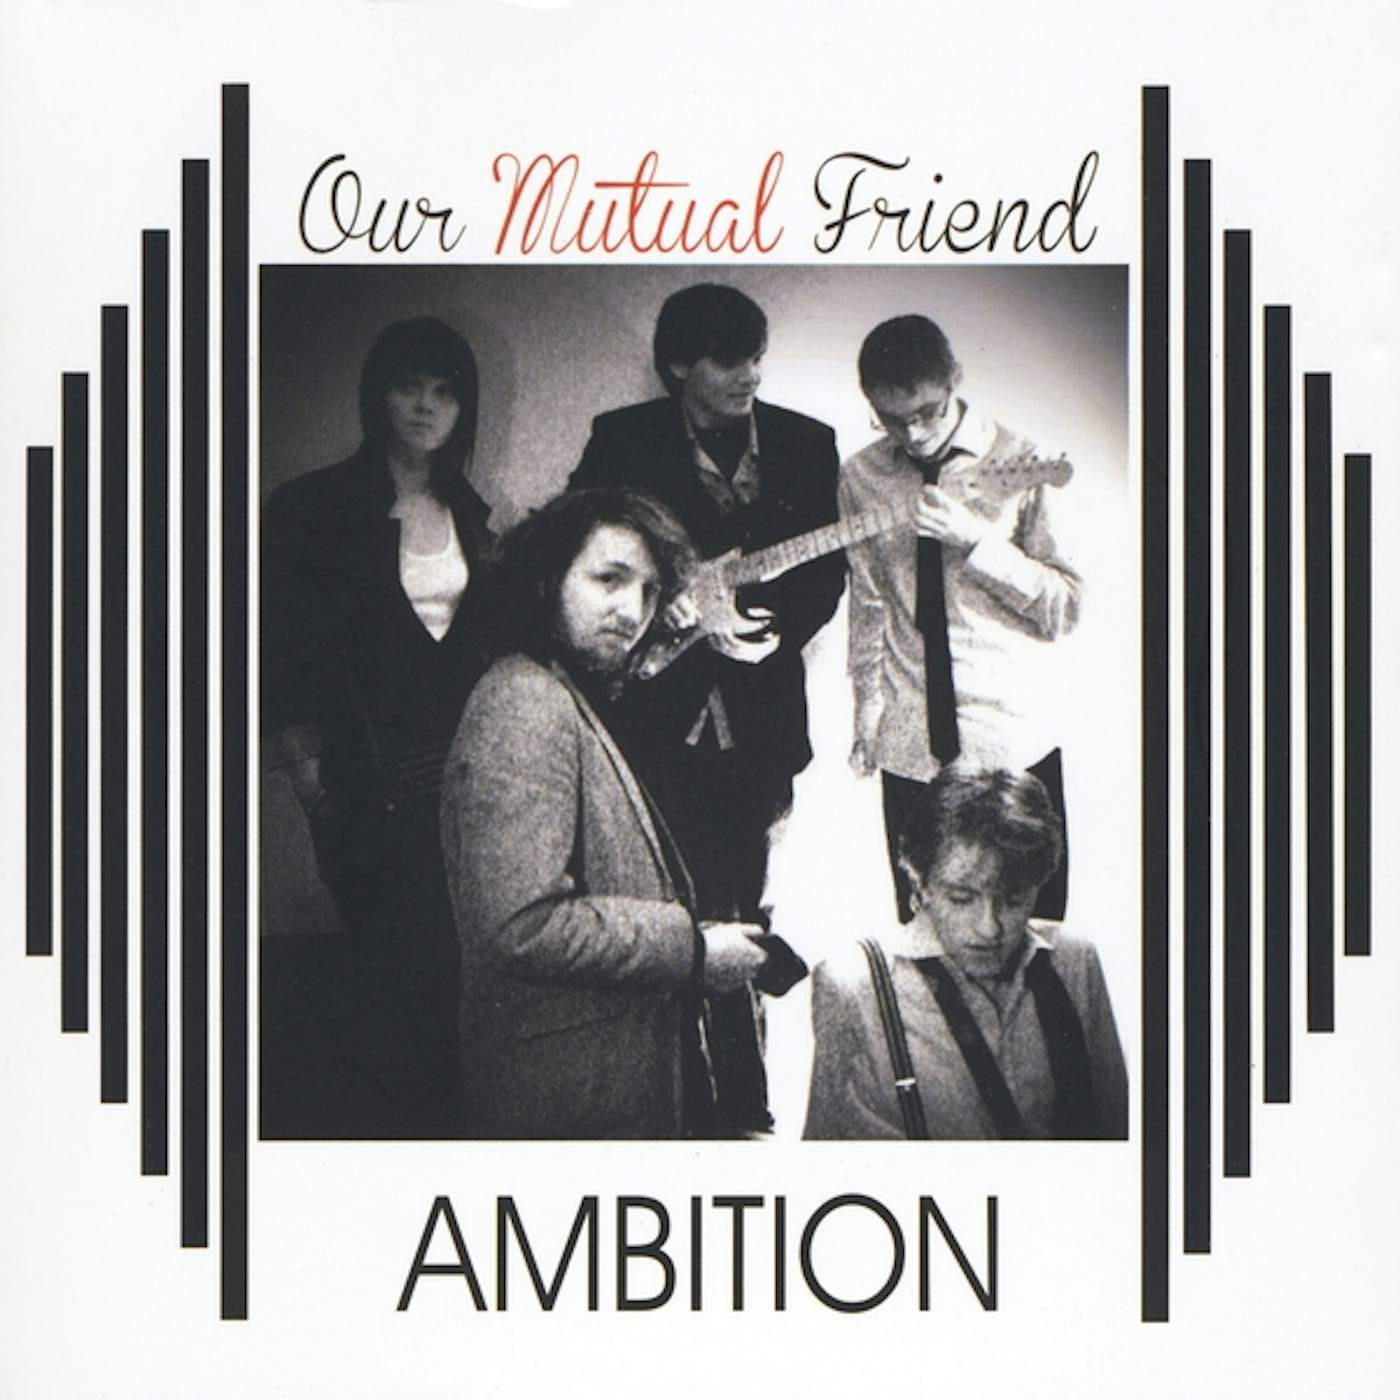 Our Mutual Friend AMBITION CD